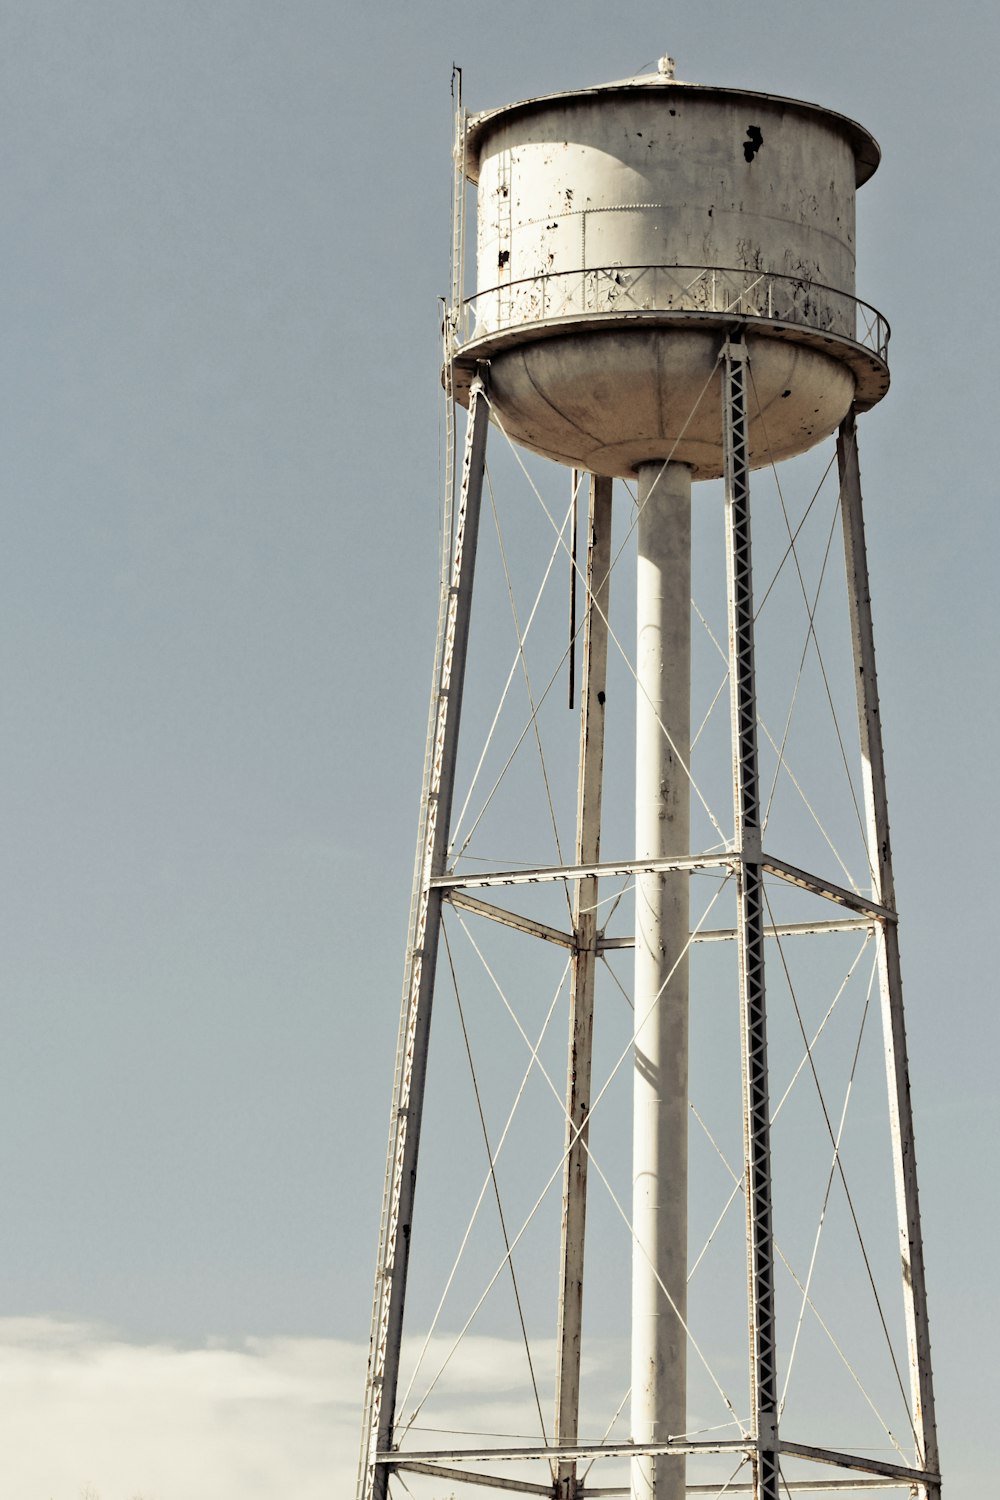 a water tower with a sky background